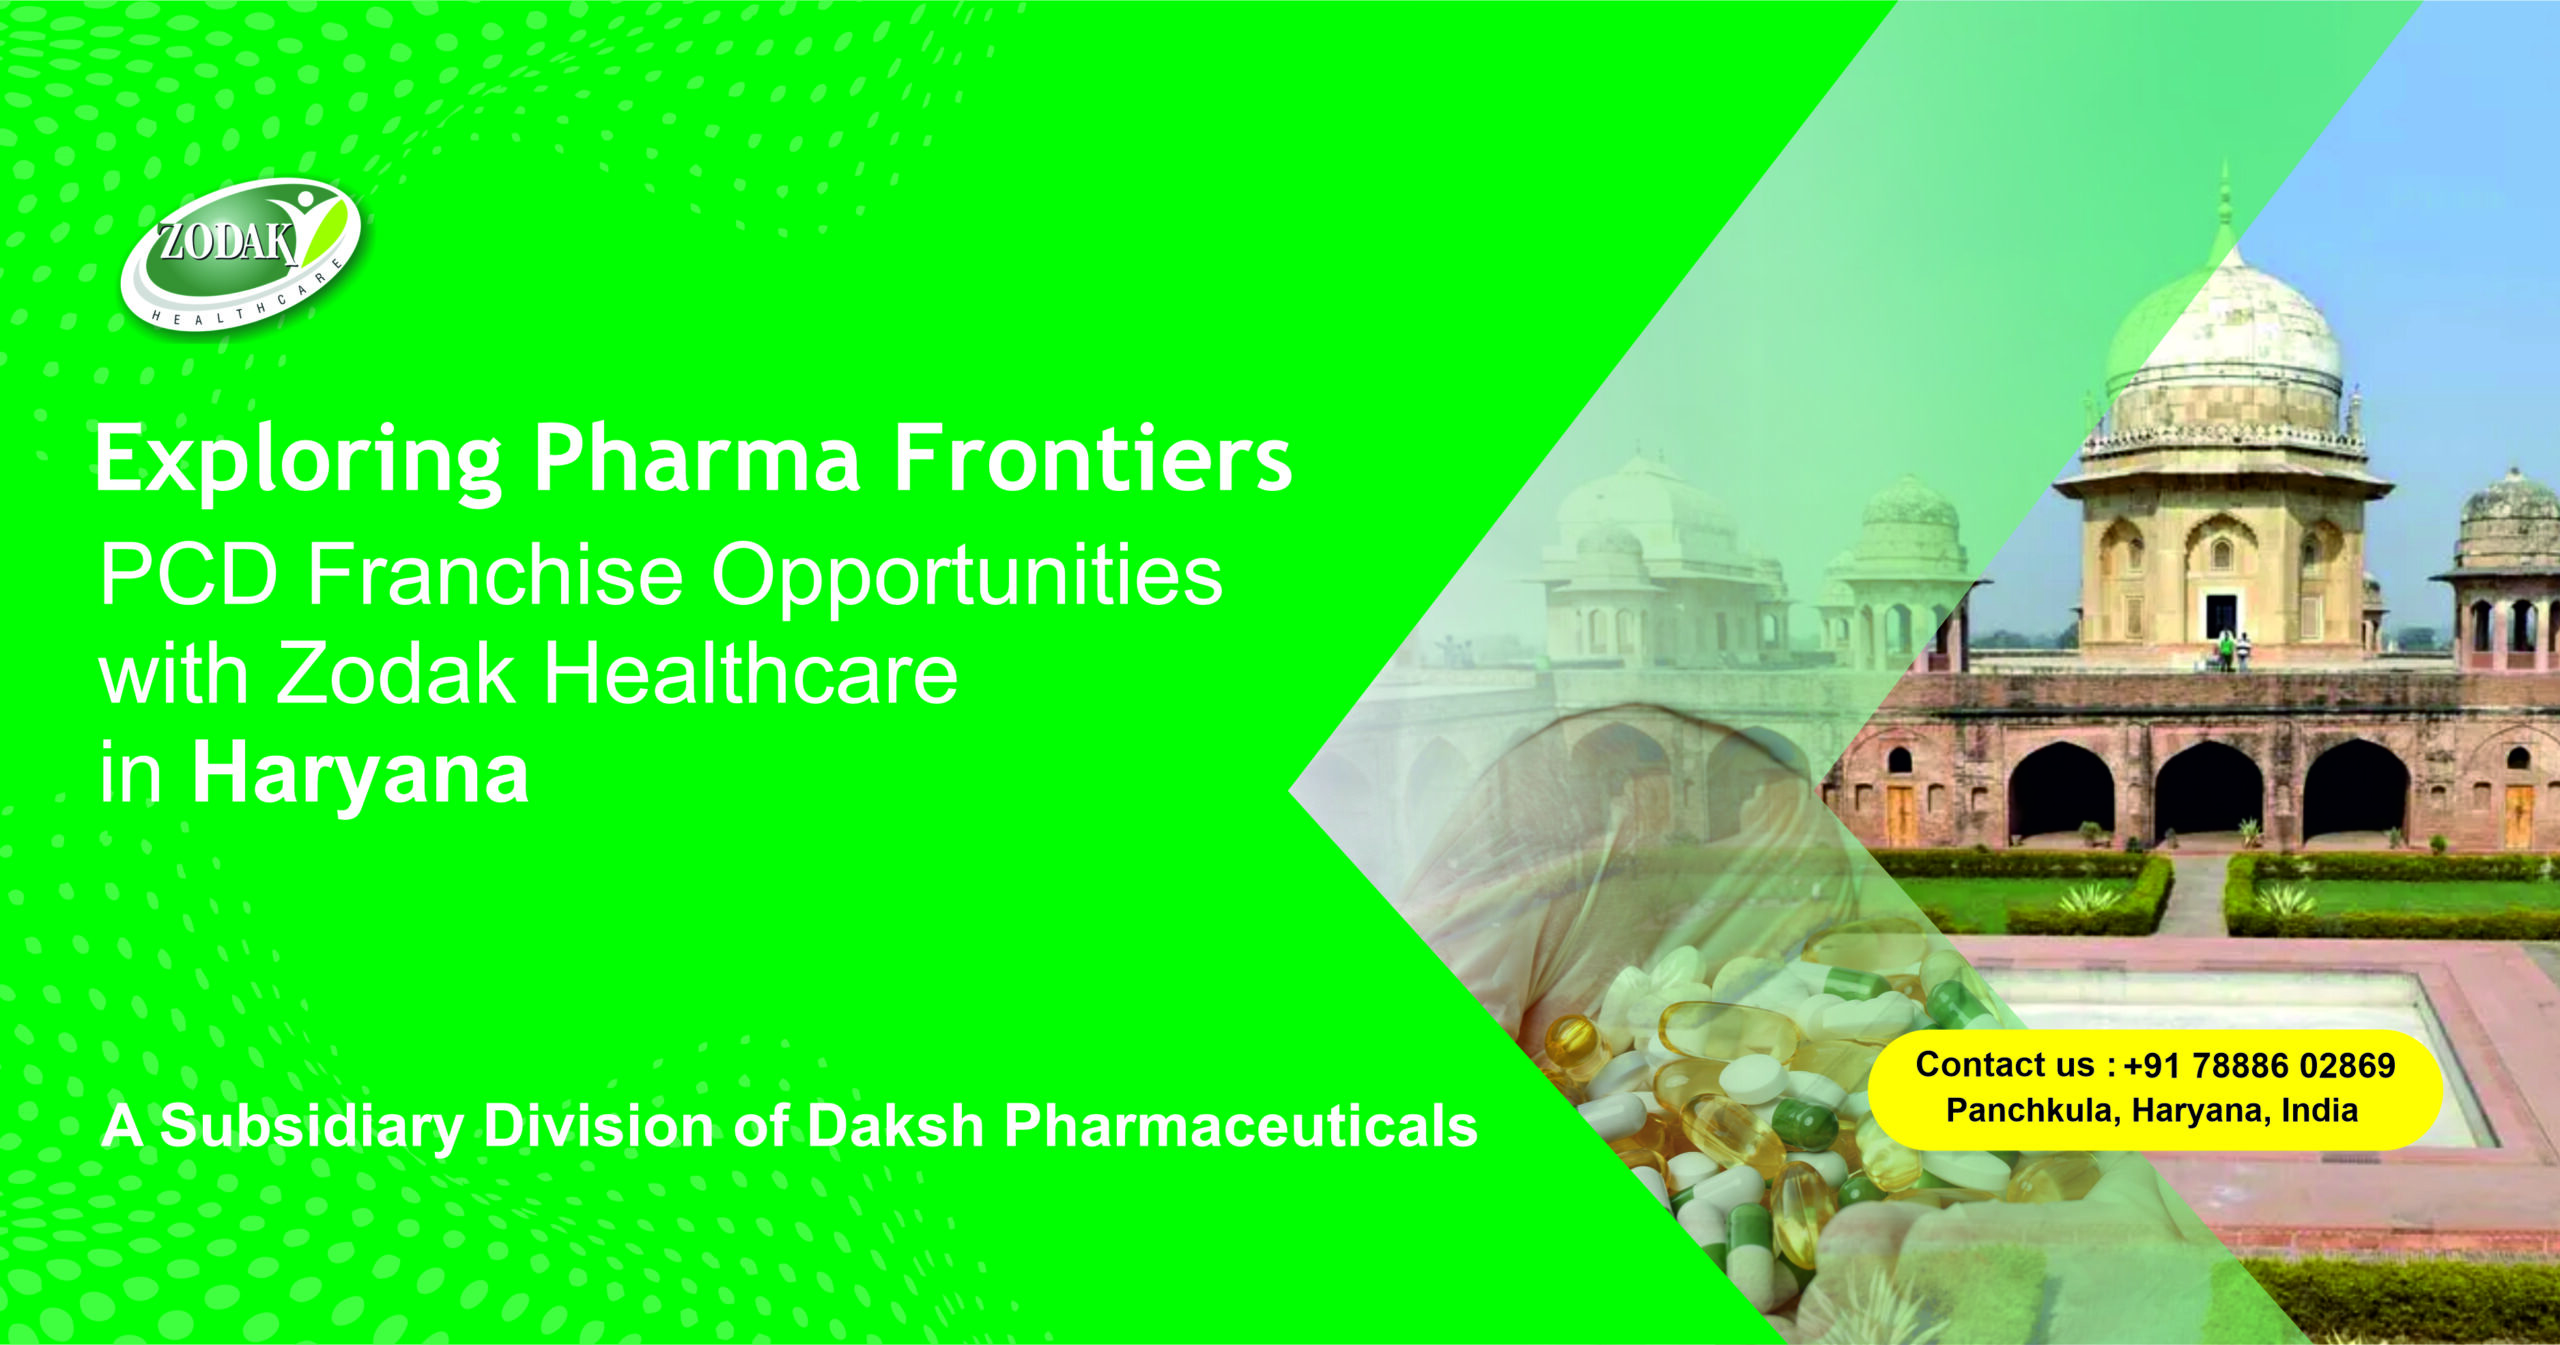 Exploring Pharma Frontiers: PCD Franchise Opportunities with Zodak Healthcare in Haryana